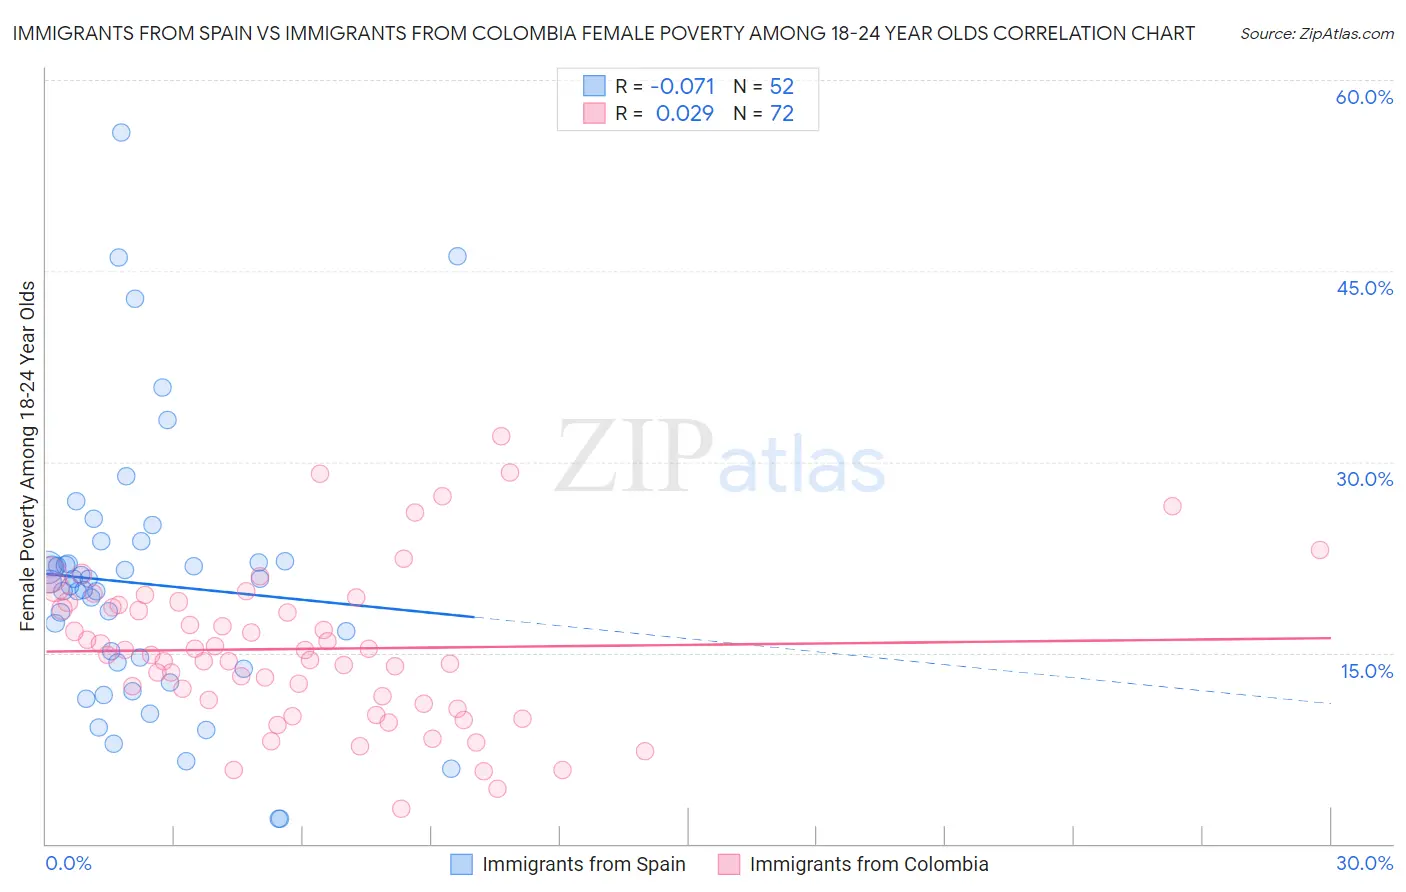 Immigrants from Spain vs Immigrants from Colombia Female Poverty Among 18-24 Year Olds